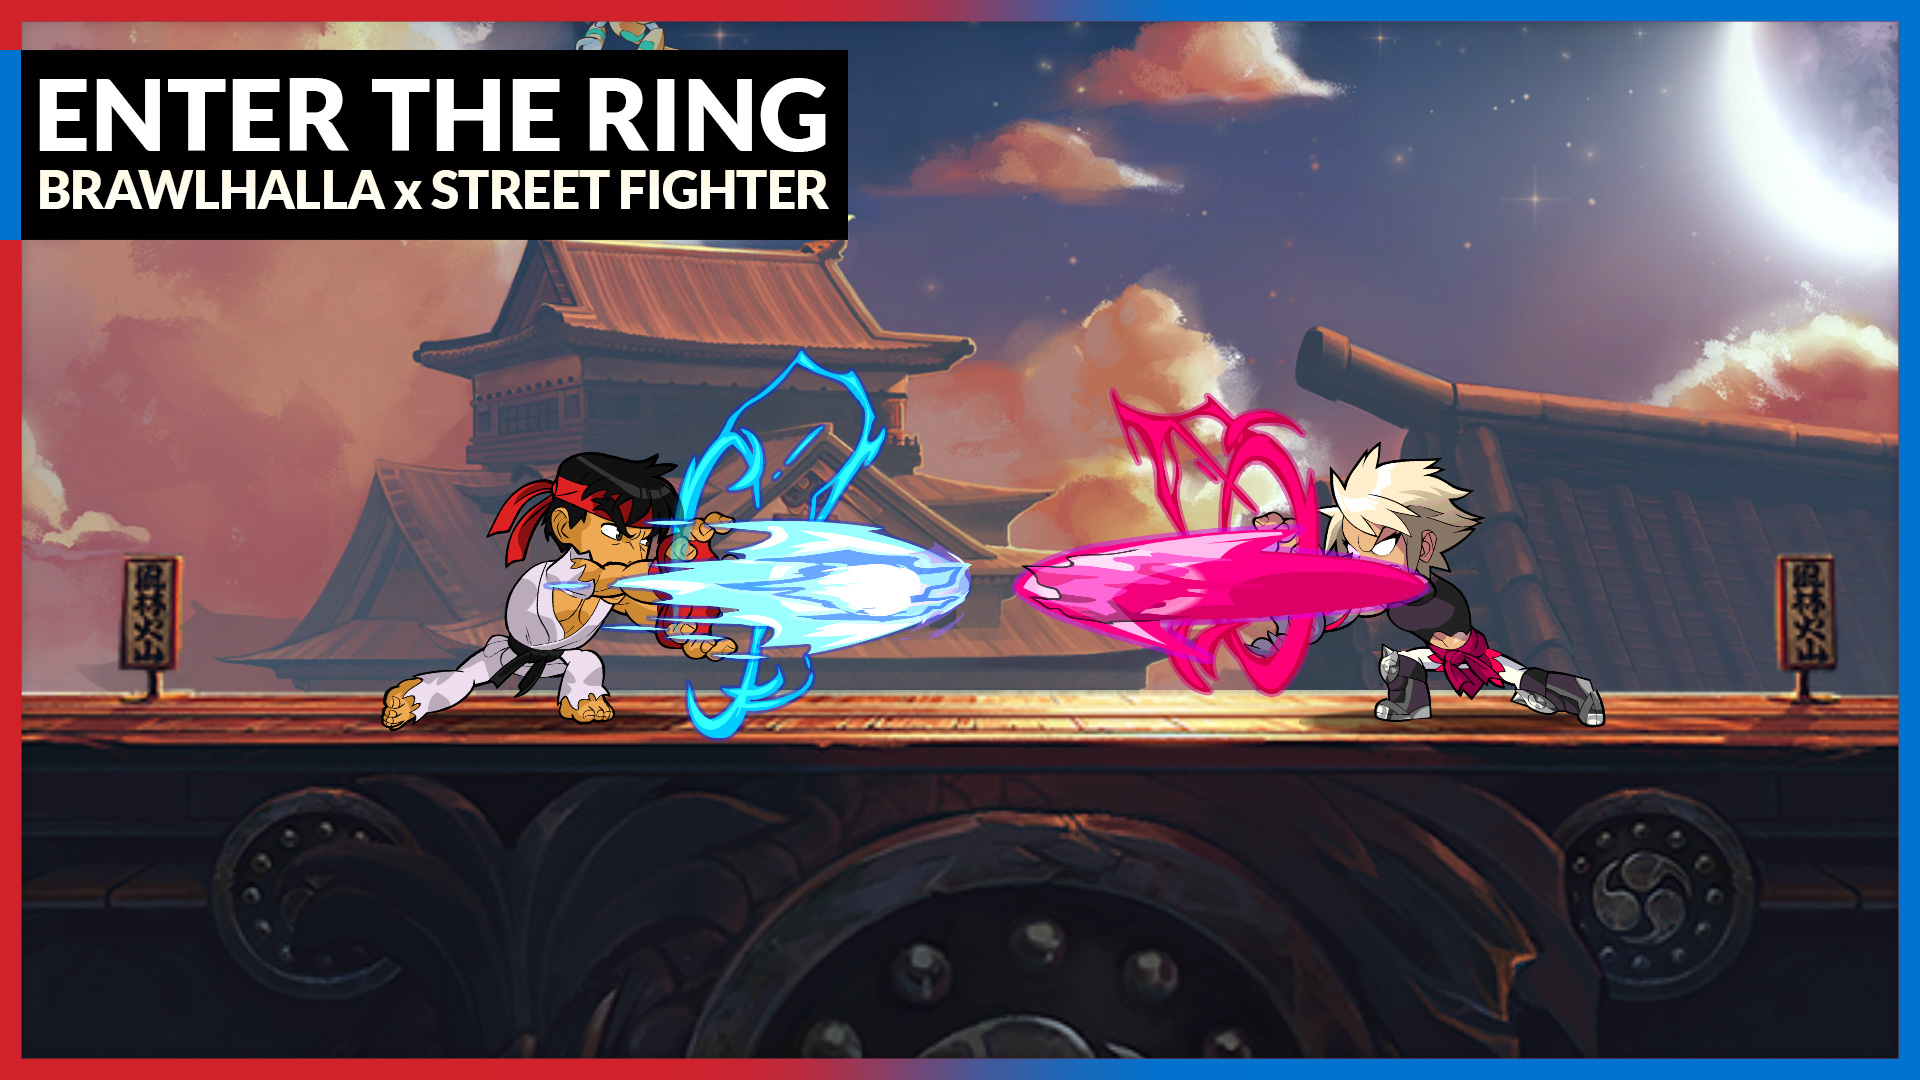 Enter the Ring with Brawlhalla x Street Fighter